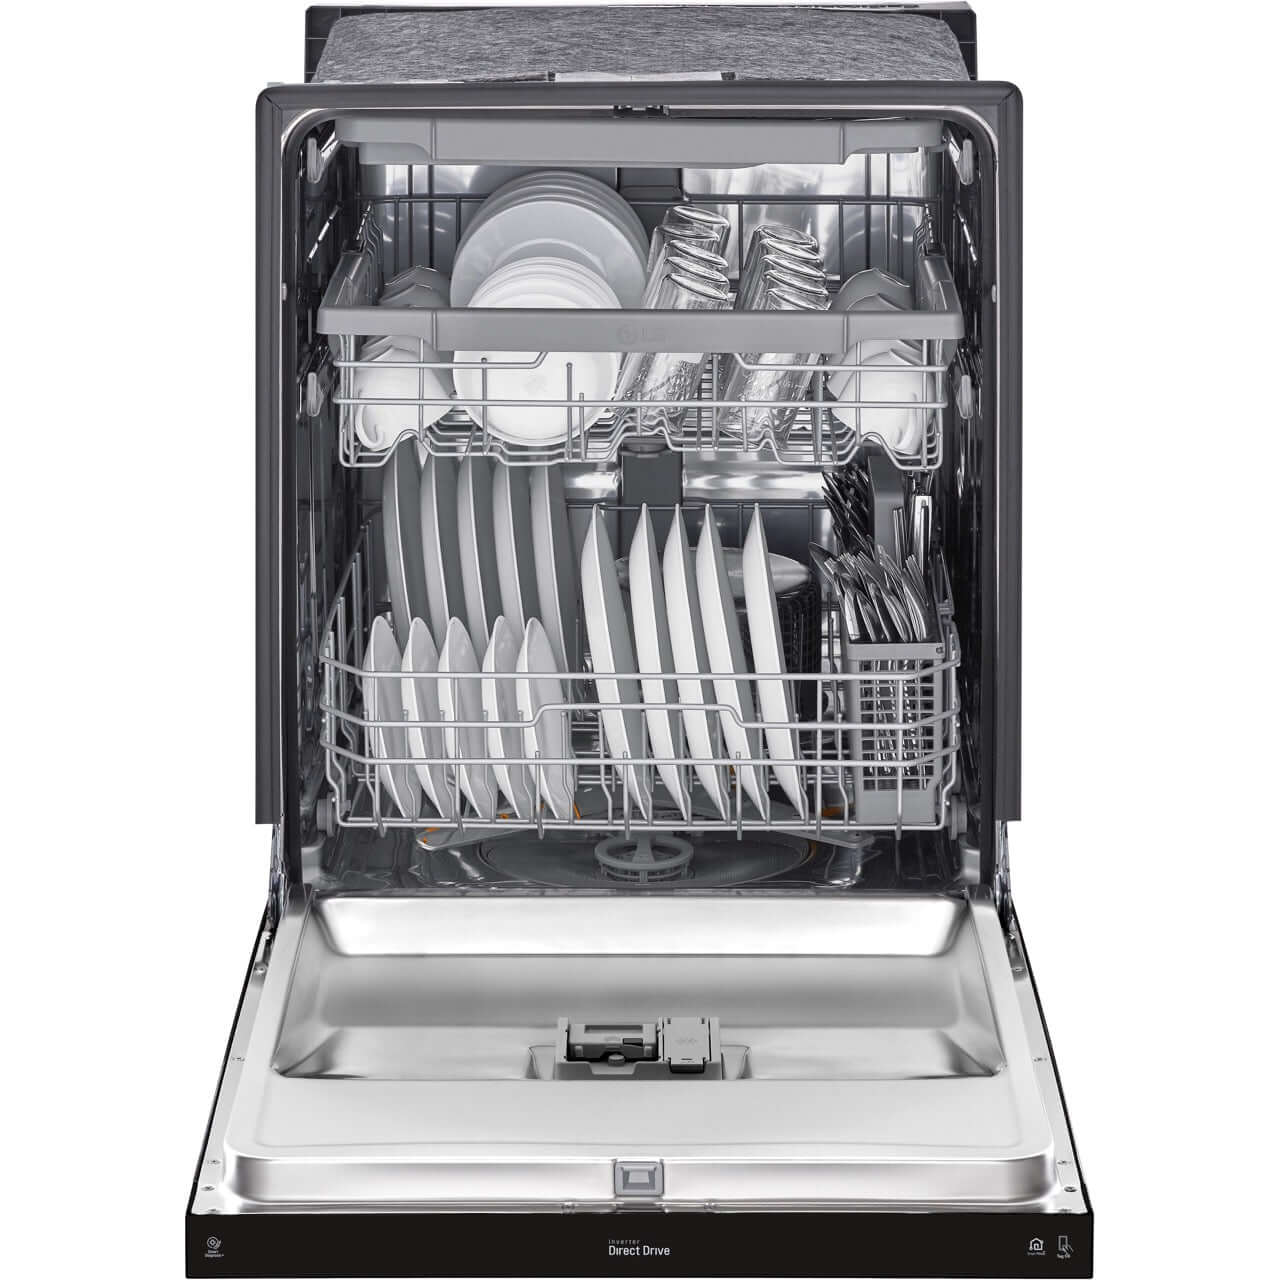 LG 24-Inch Front Control Dishwasher with QuadWash and 3rd Rack in Smooth Black (LDFN4542B)